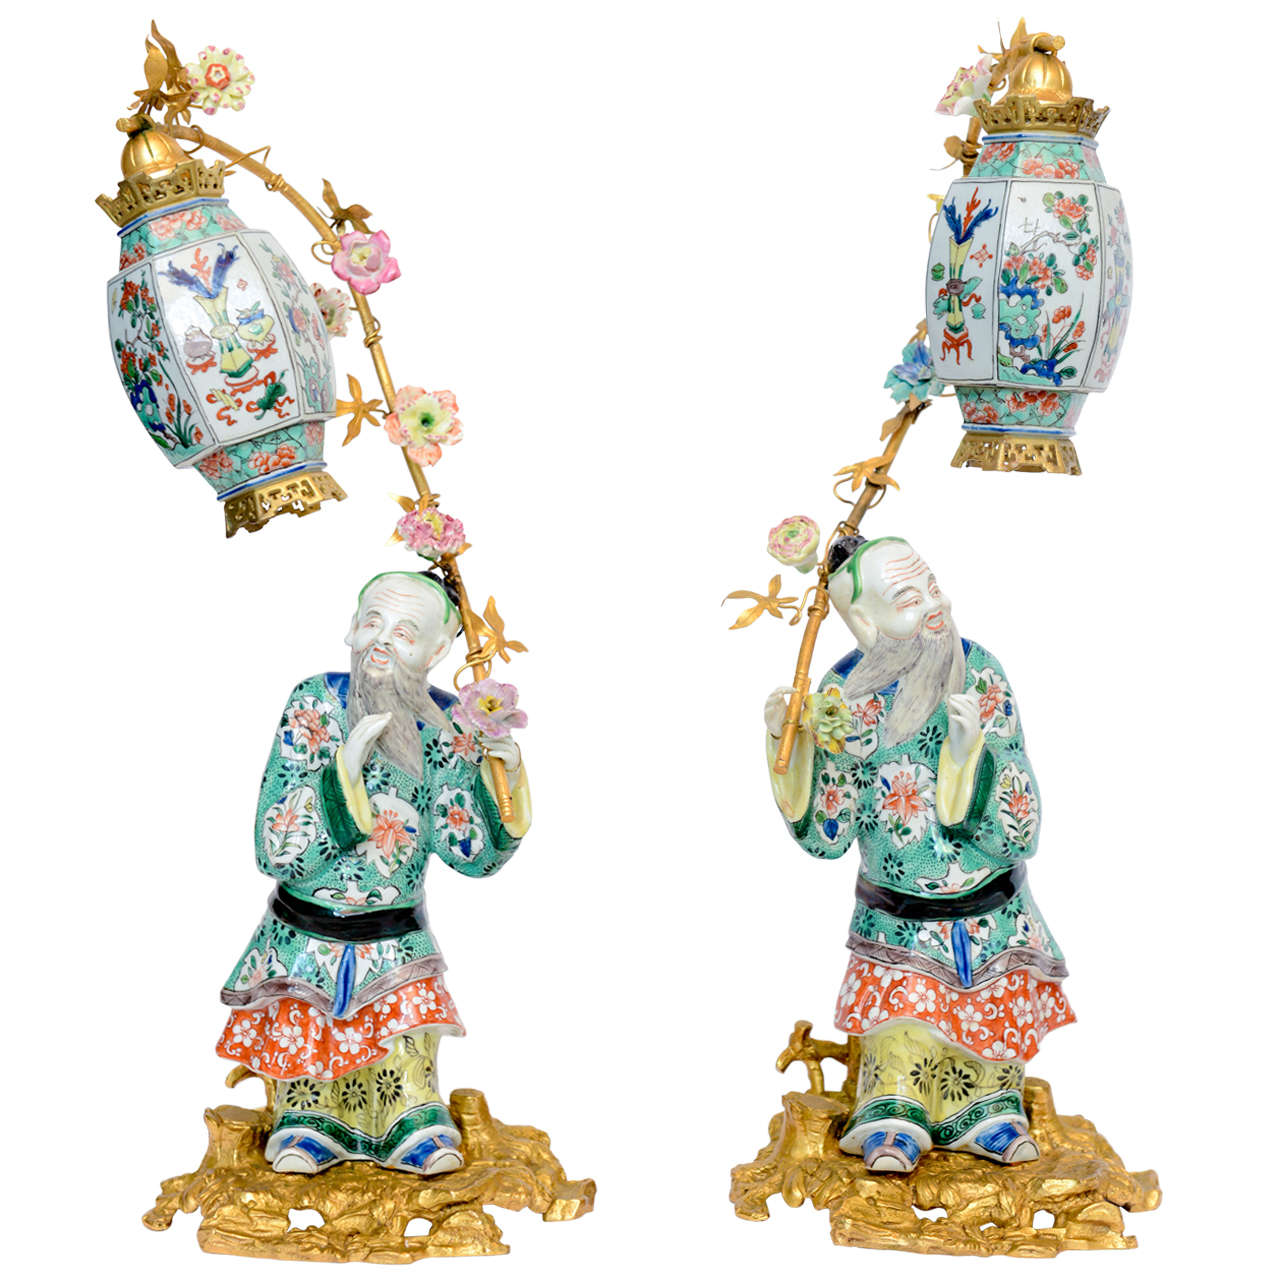 Pair Of Chinese Porcelain Figurines Holding Up Lanterns